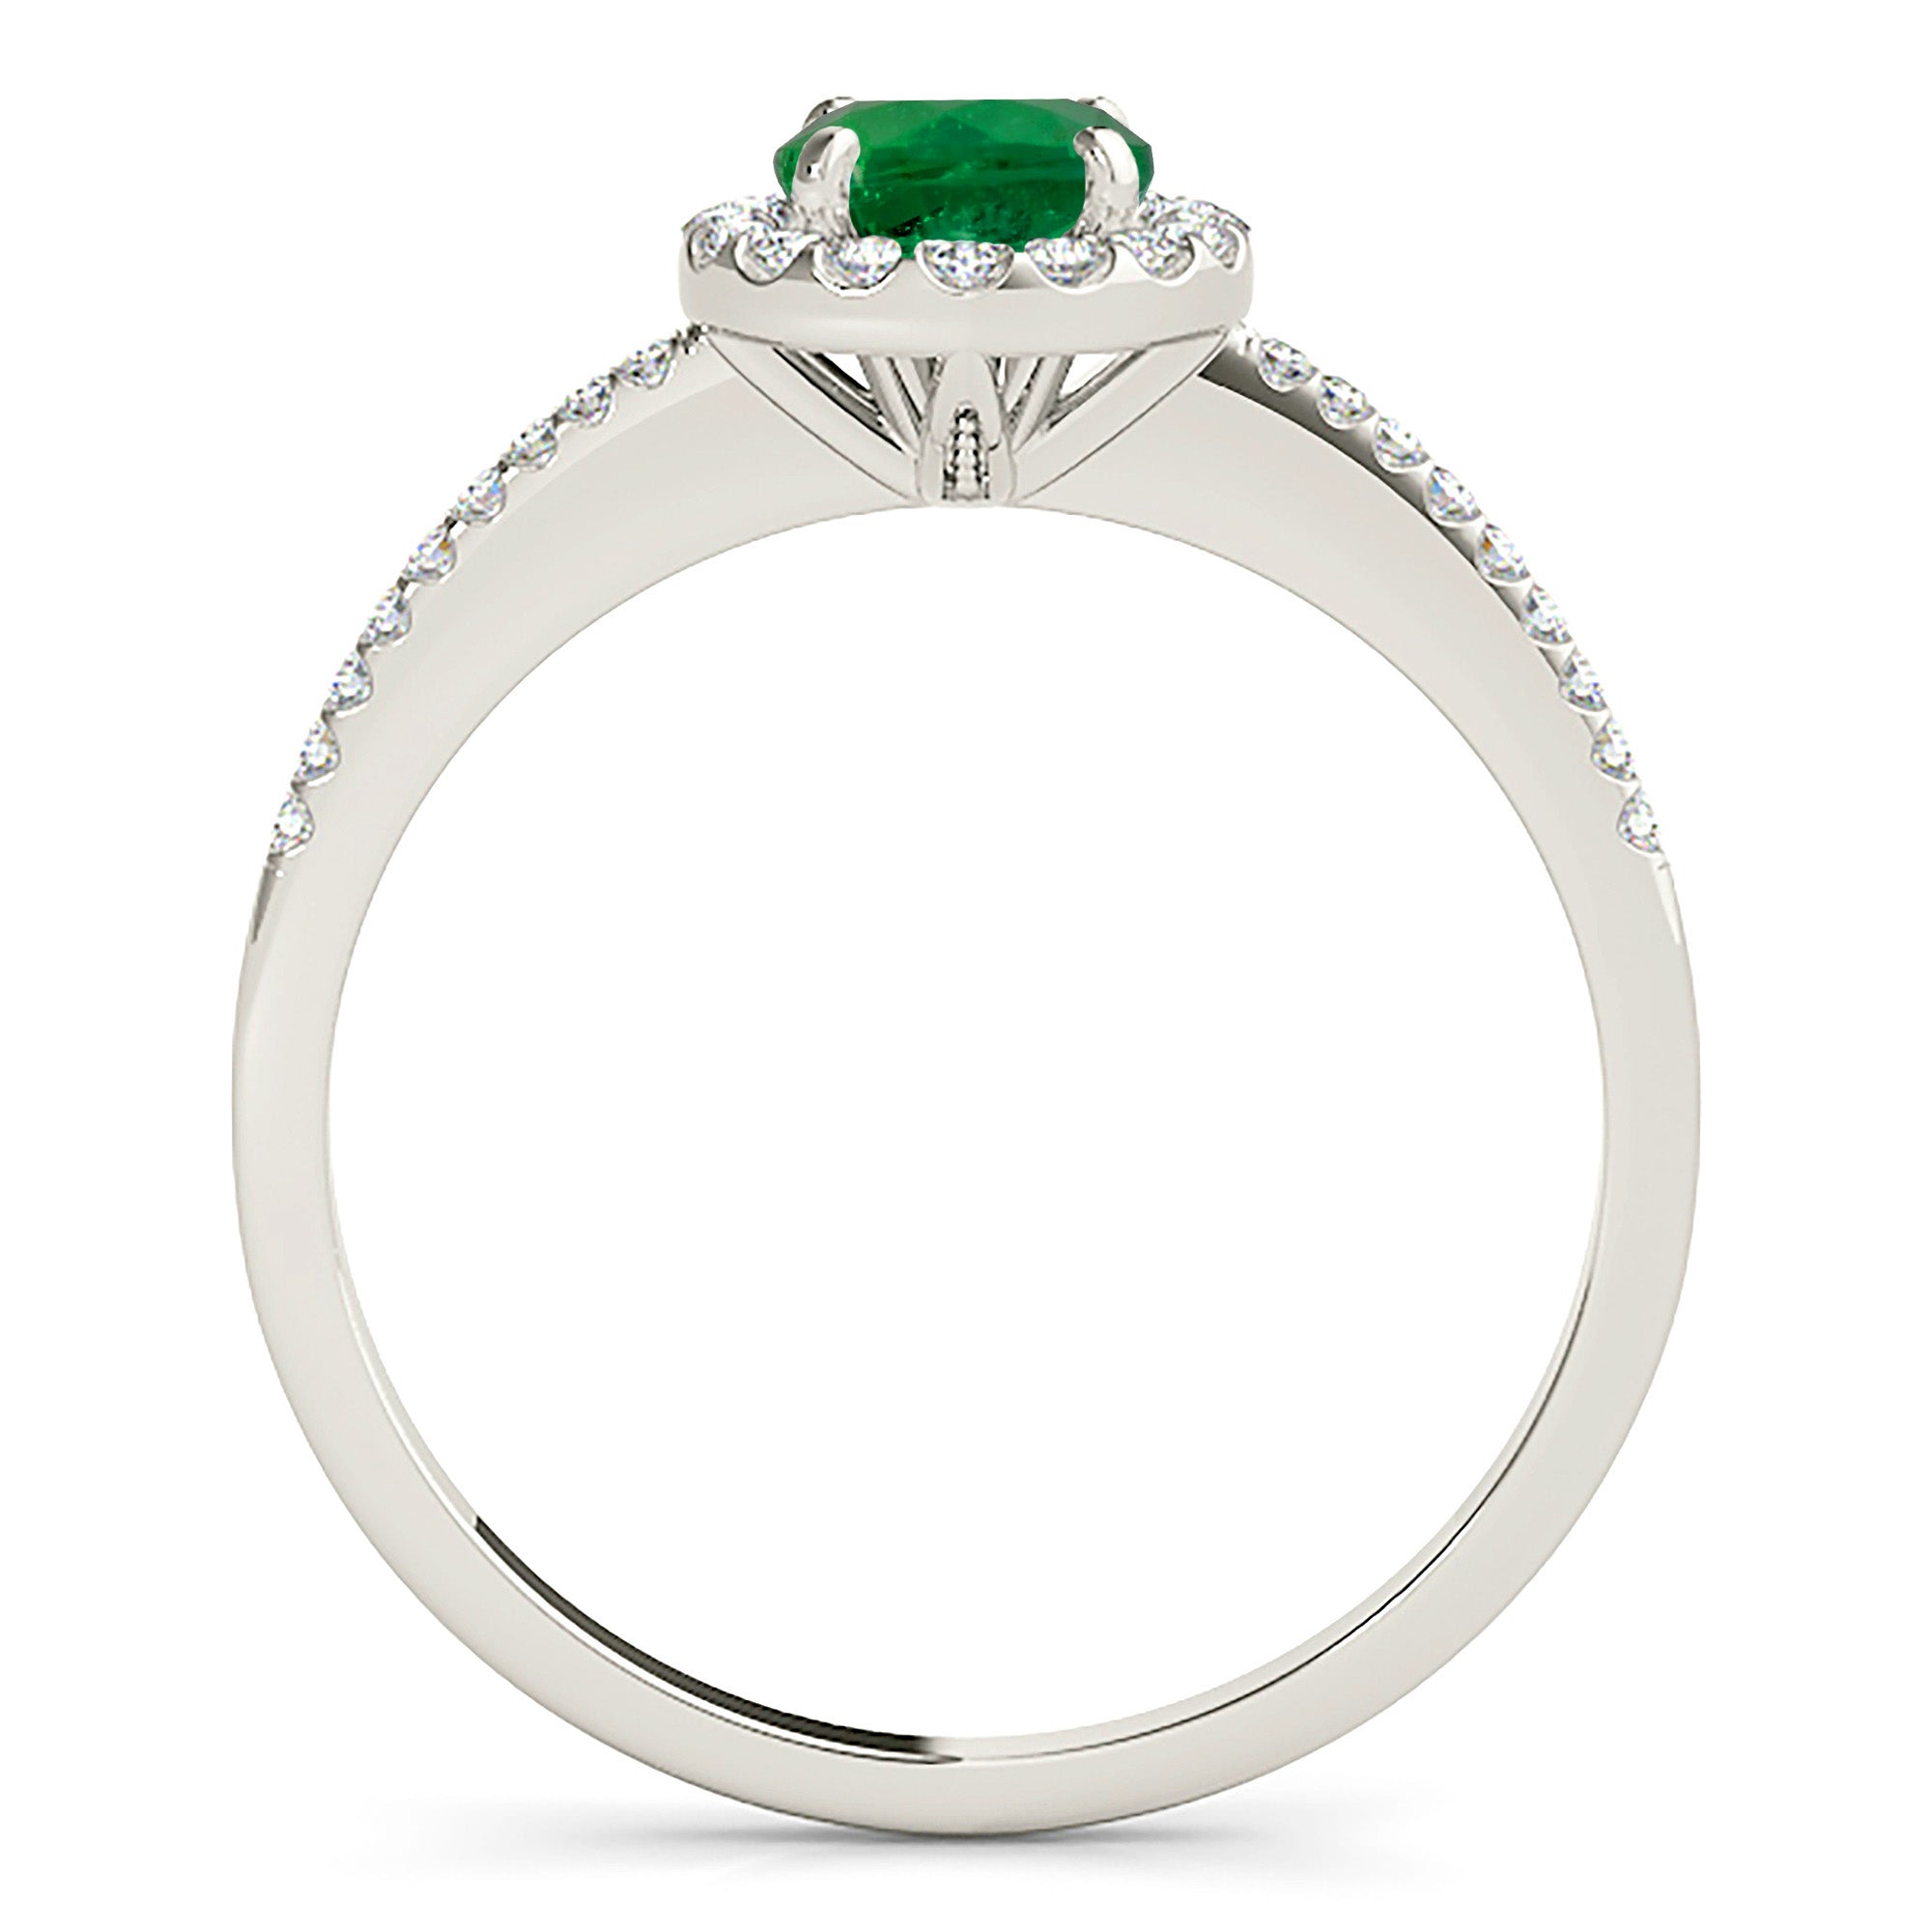 1.14 ct. Genuine Emerald Ring with 0.20 ctw. Diamond Halo And Delicate Diamond band-in 14K/18K White, Yellow, Rose Gold and Platinum - Christmas Jewelry Gift -VIRABYANI